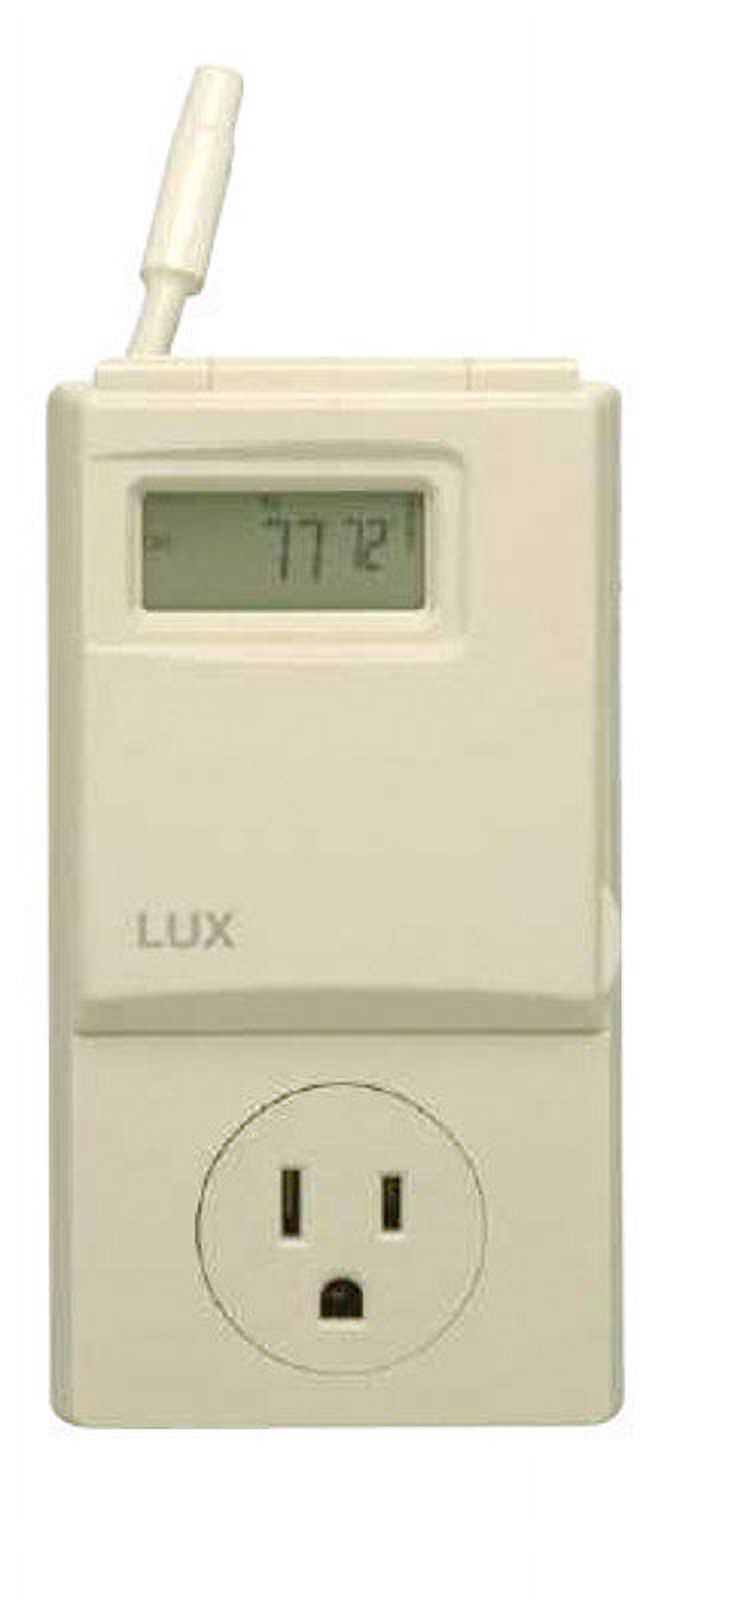 Lux WIN100-A05 Programmable Outlet Thermostat - image 2 of 3